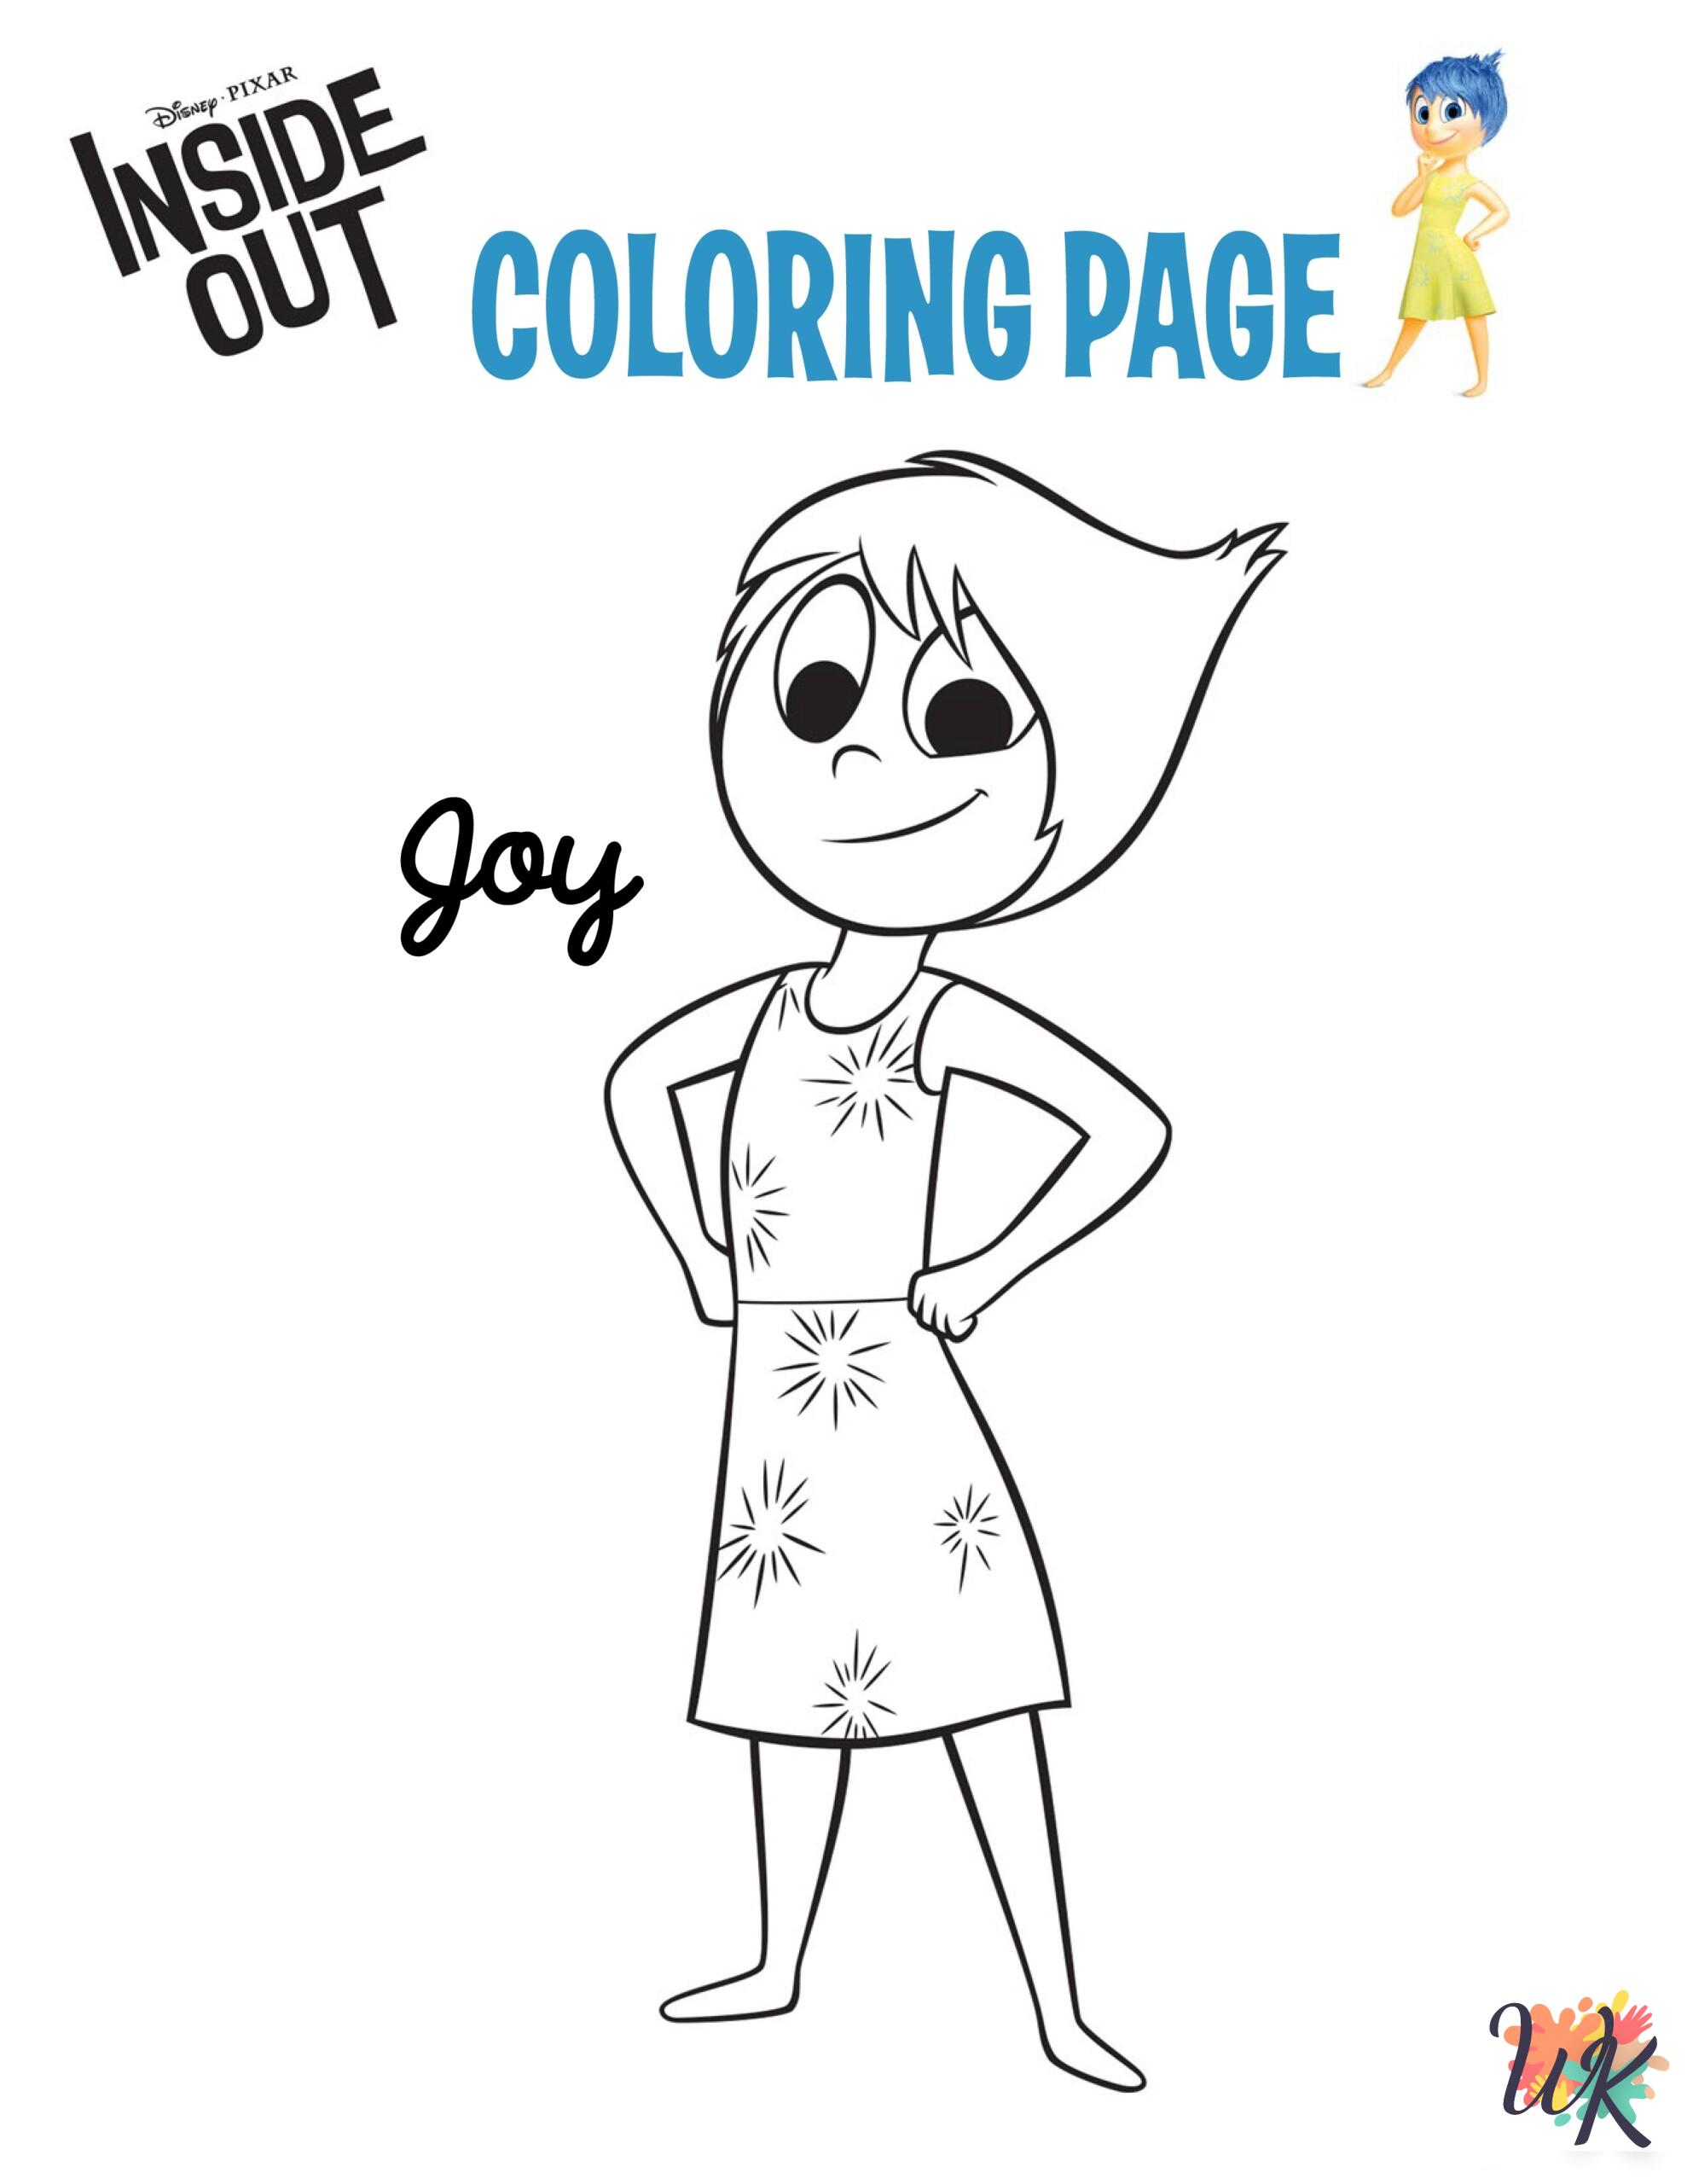 Inside Out free coloring pages